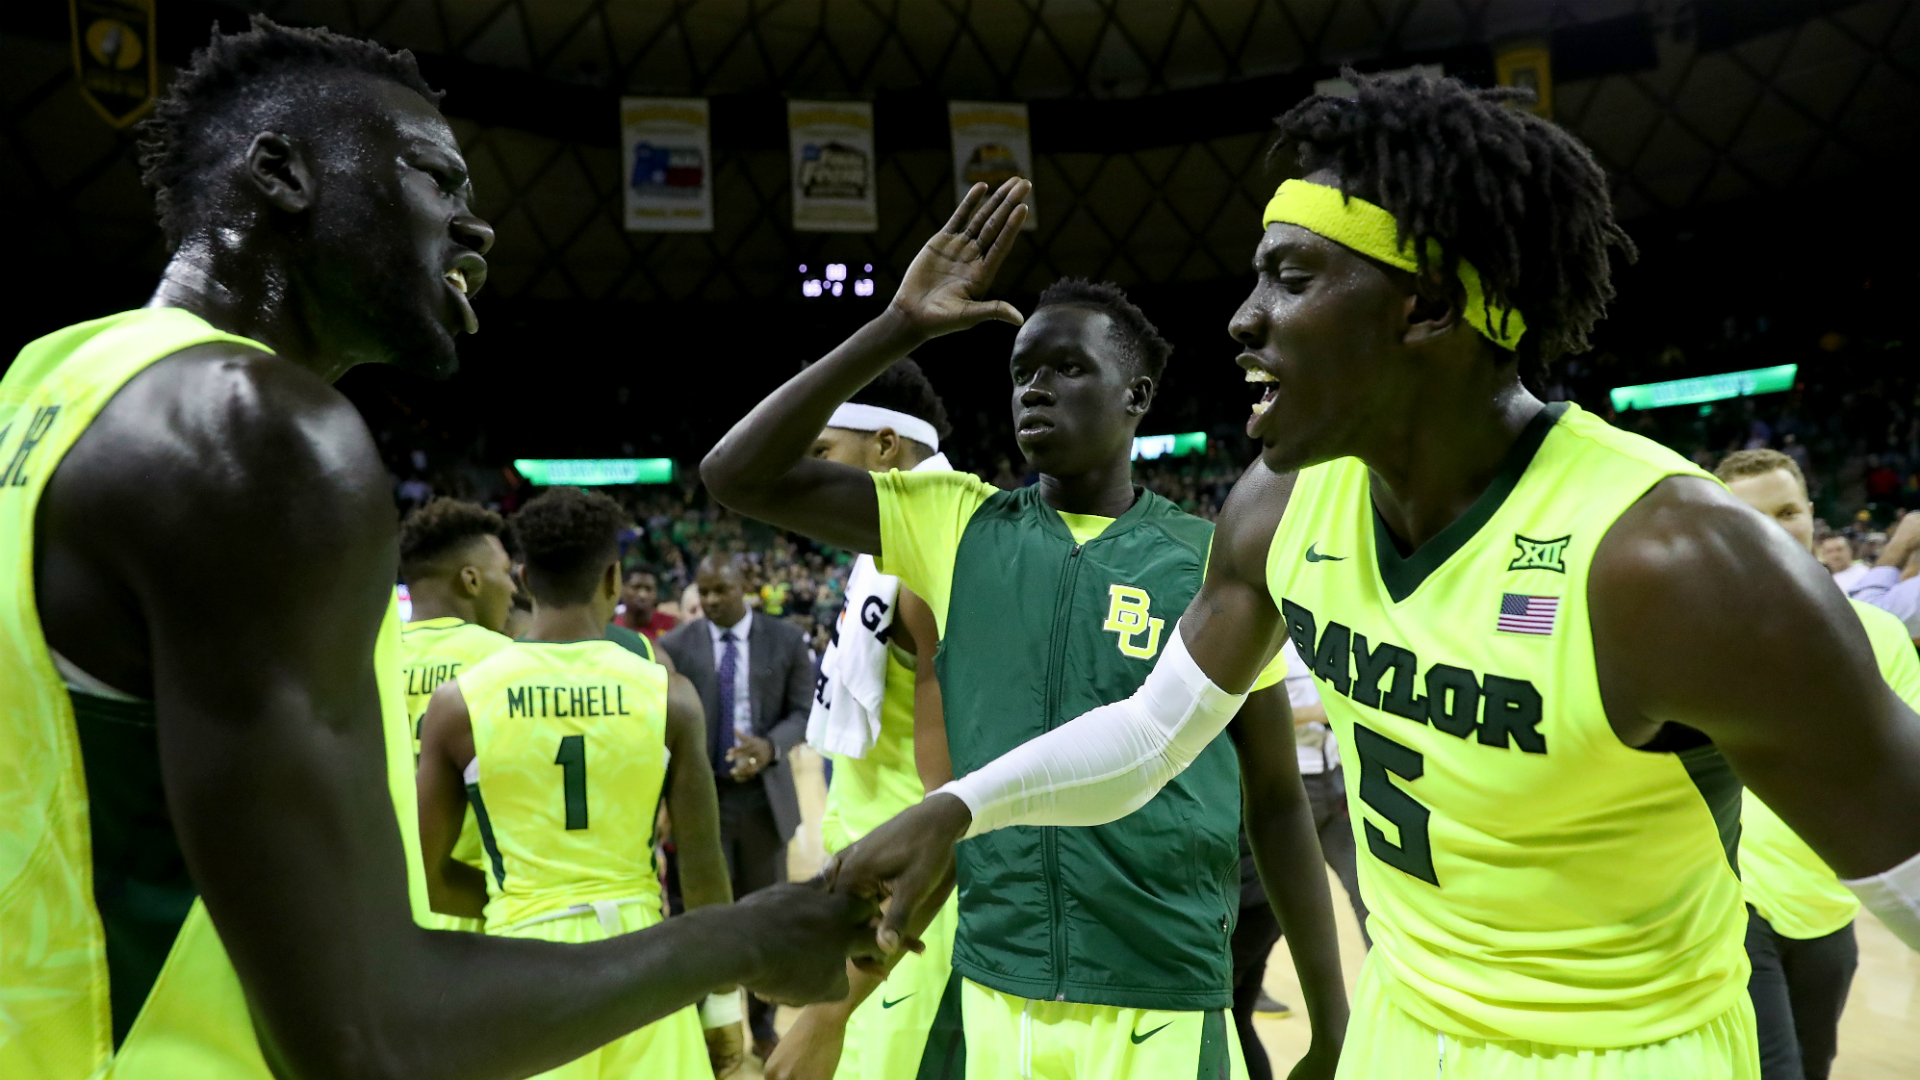 College basketball rankings: Baylor goes from dumpster fire to No. 1, but job isn't ...1920 x 1080